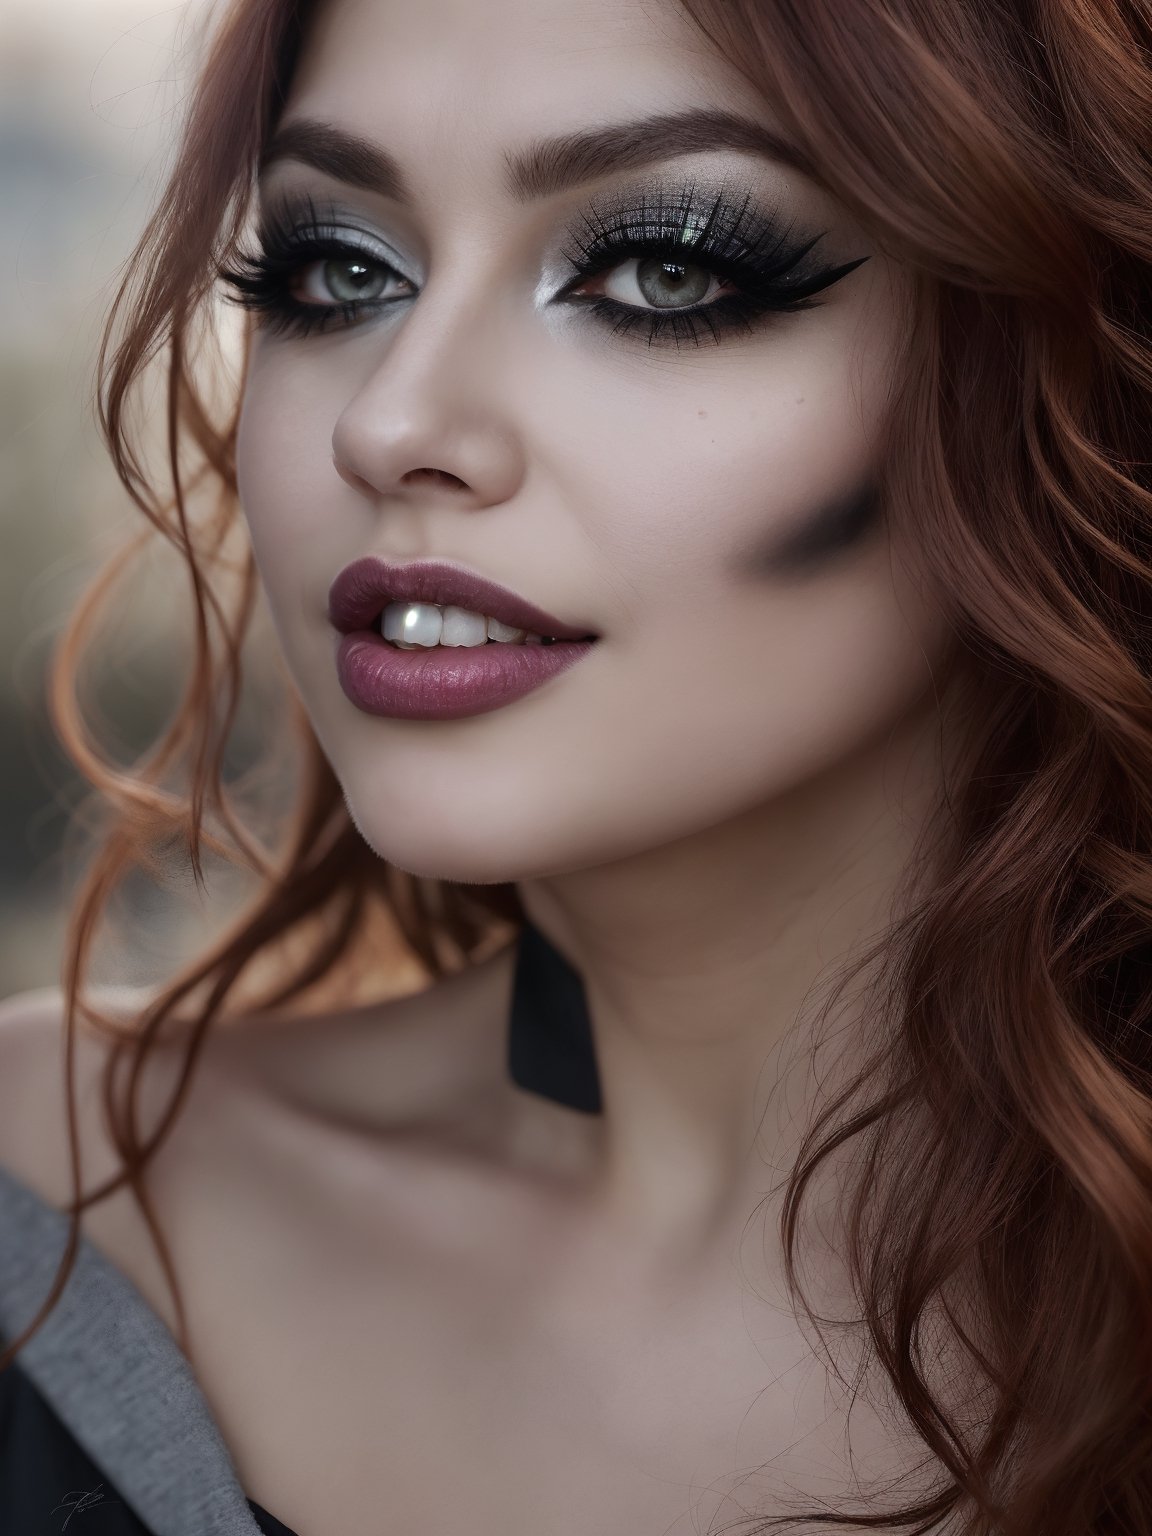 ((HDR)), Extremely Realistic, hyper realistic, perfect teeth, a mexican supermodel, 23y.o. ,   ((eyelashes)), colored lips, smile, curly red_hair,  ((smokey eyes)), (gothic make_up), night glowy street , photo of perfecteyes eyes, from side